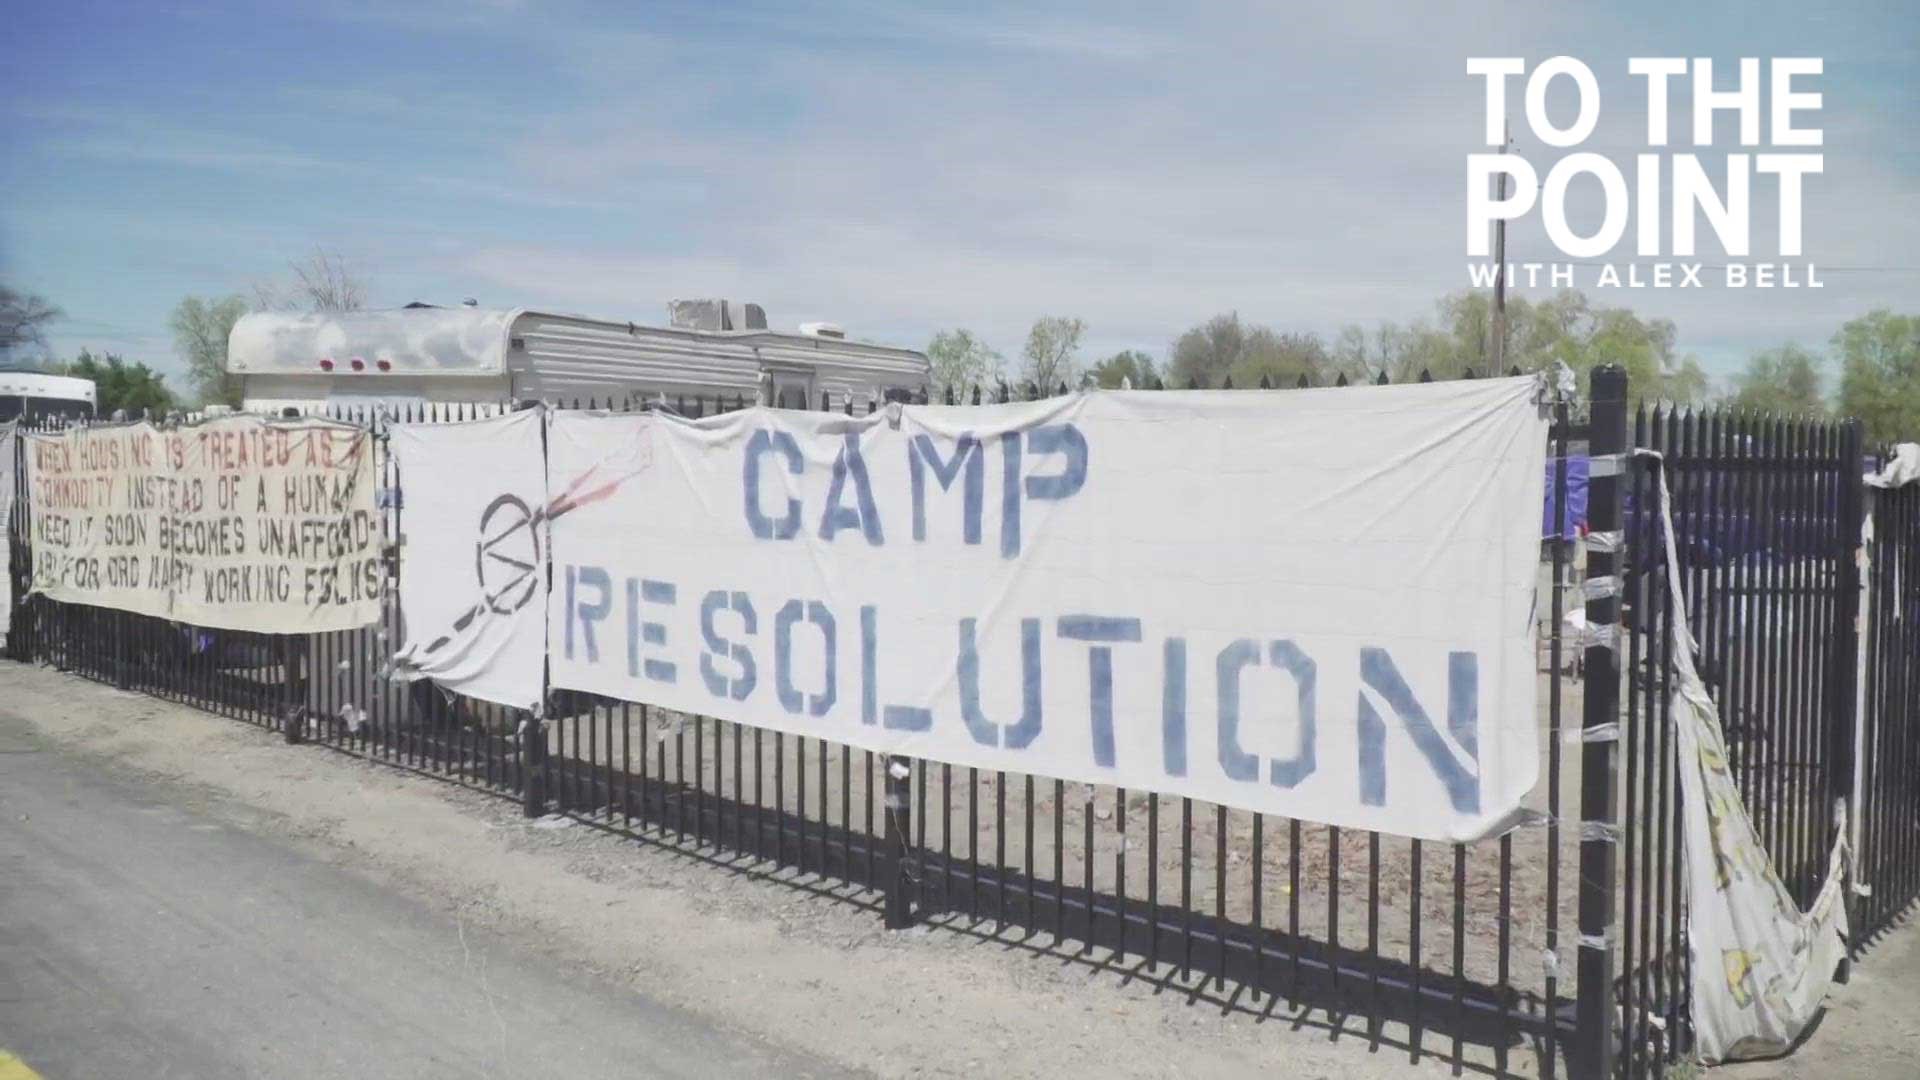 Sacramento District Attorney claims toxic chemicals at Camp Resolution, demands immediate action